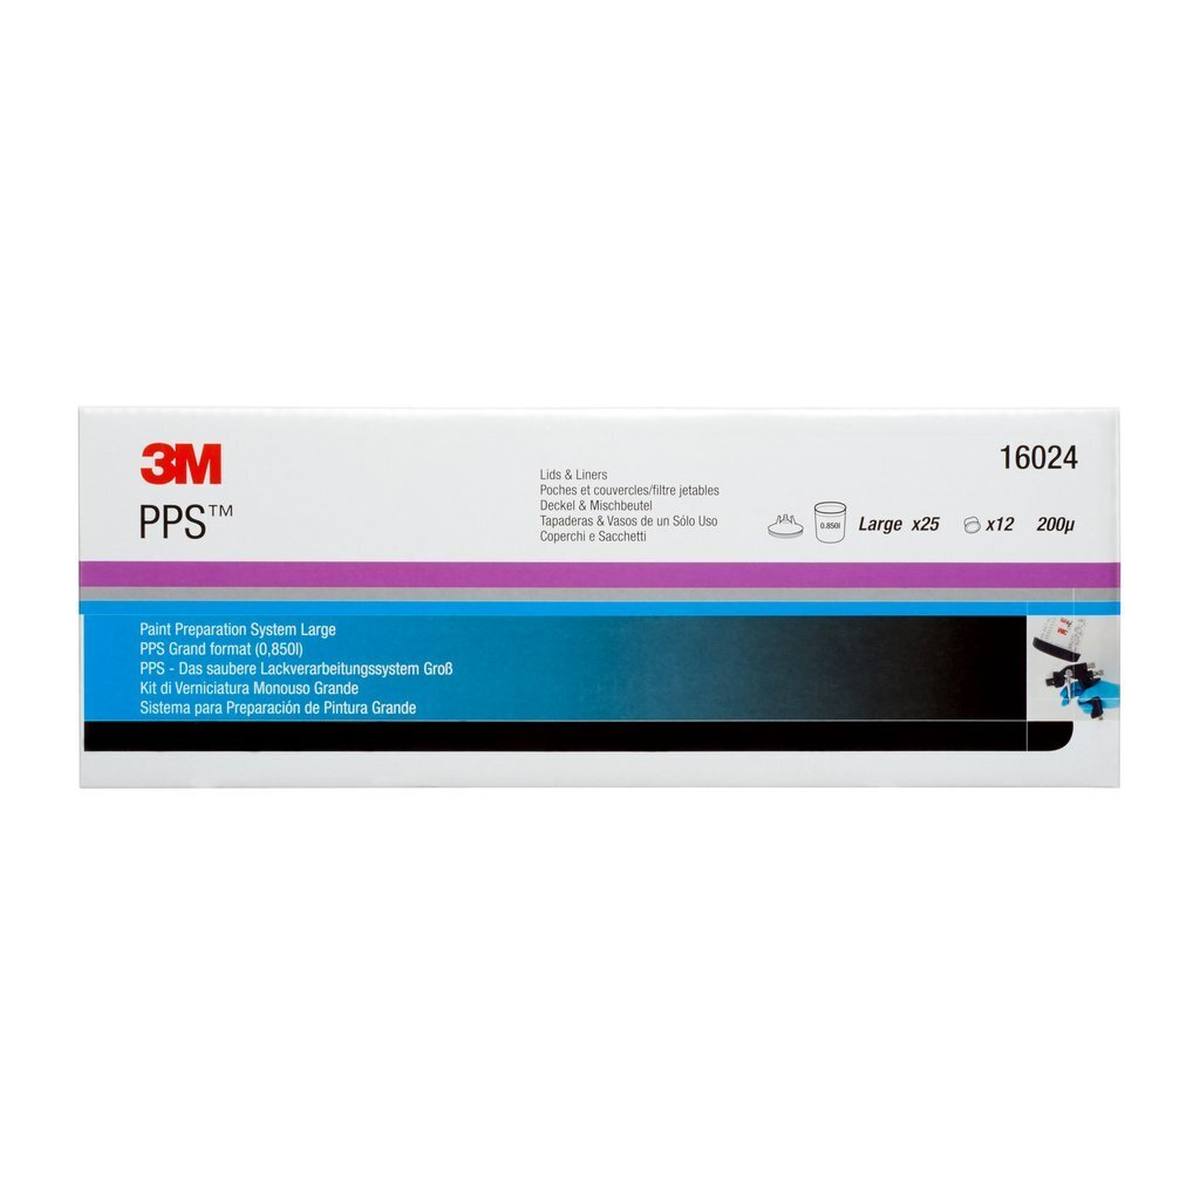 3M PPS Kit suodatin 200my, 25 pussia